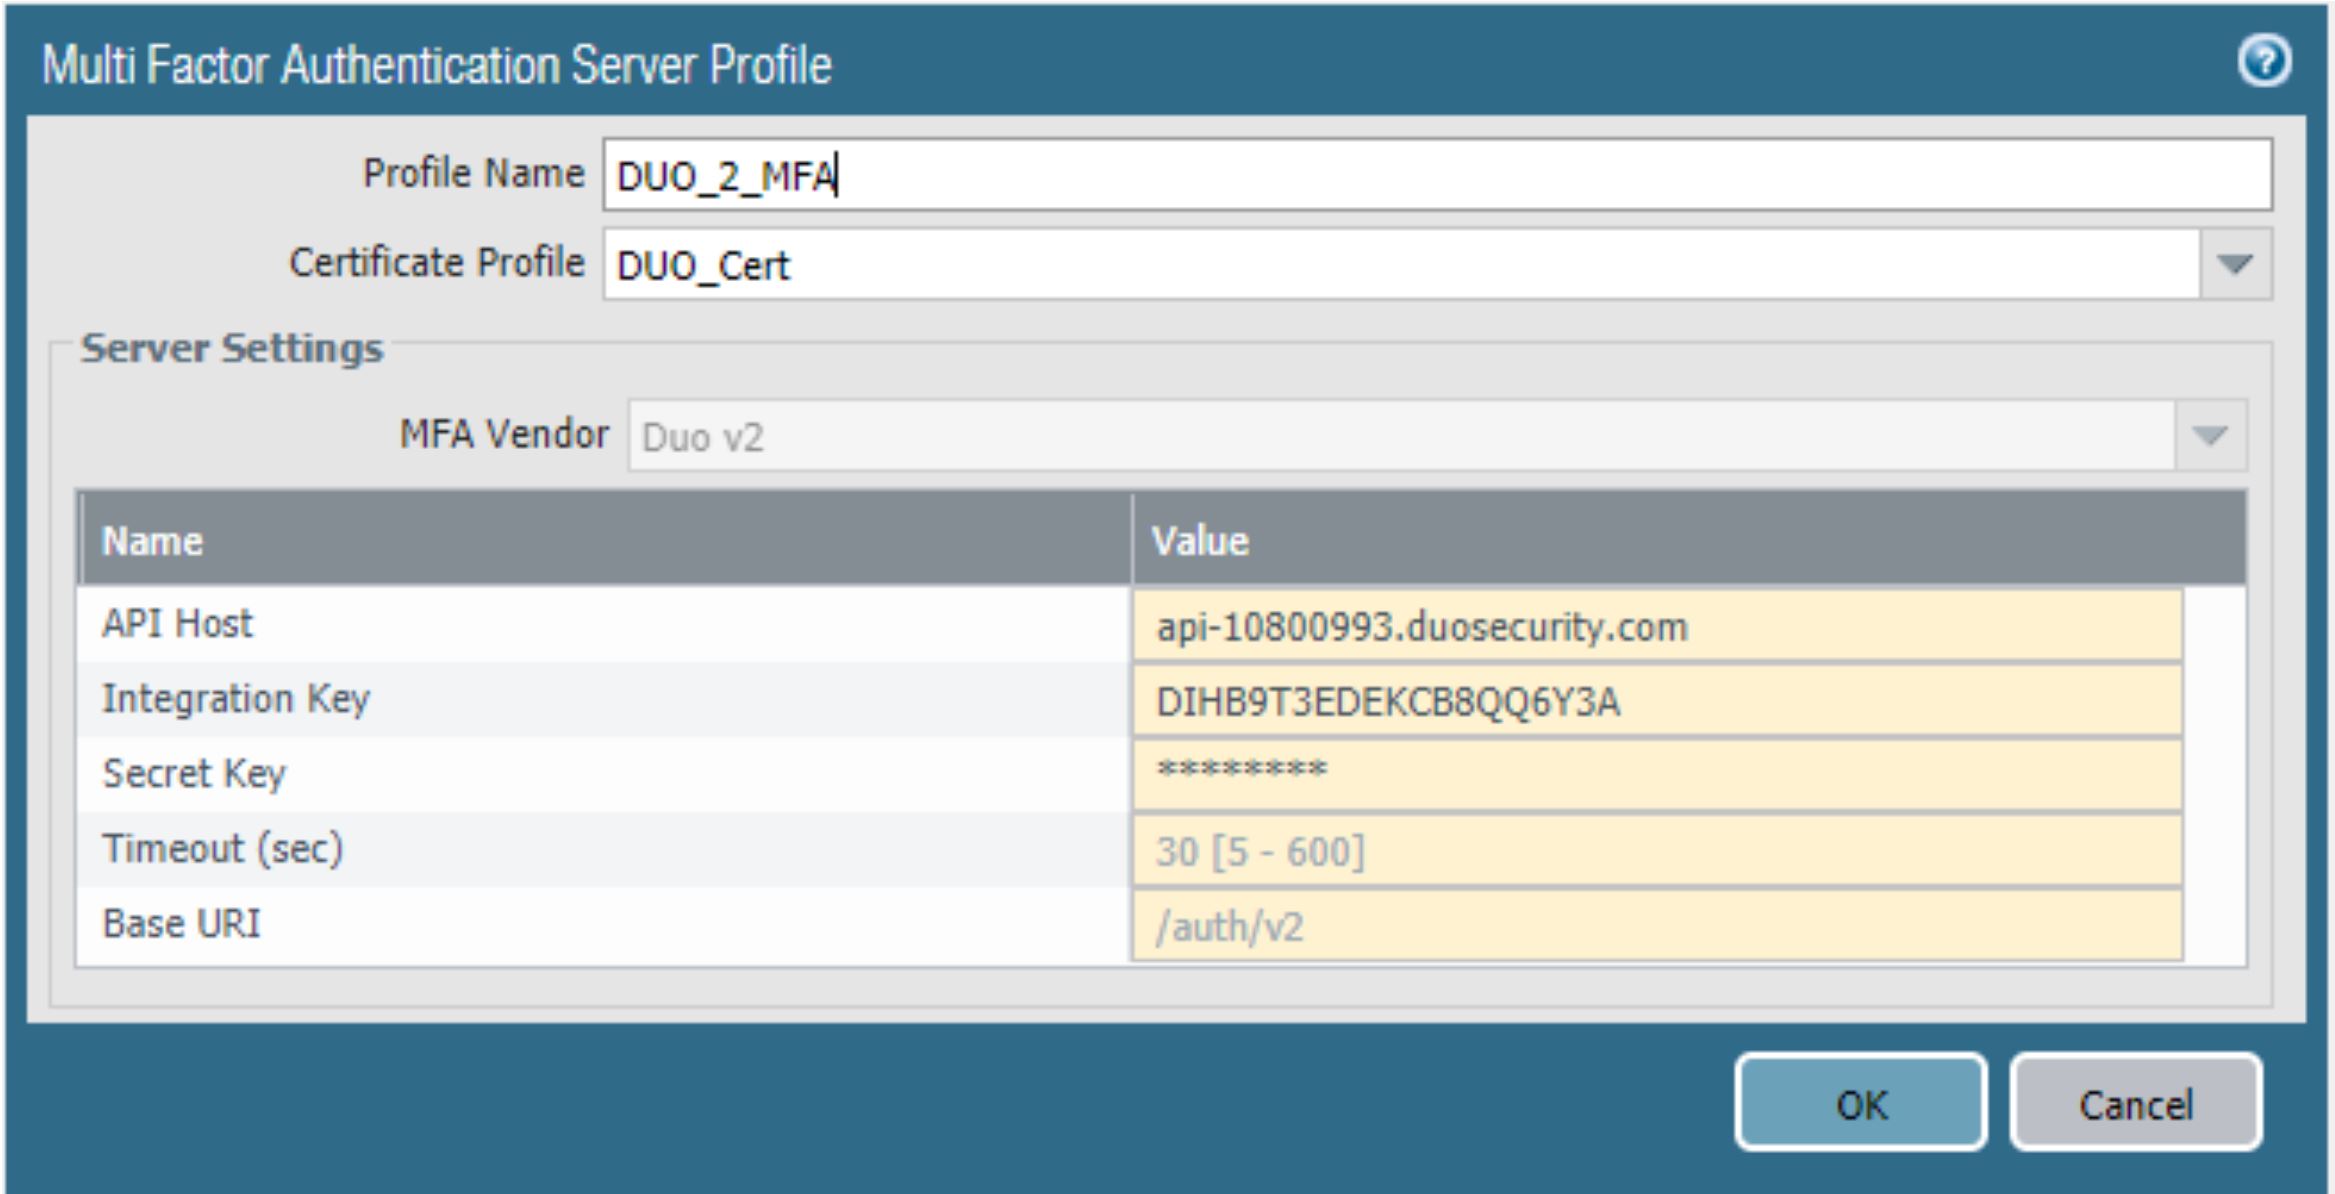 This image shows Multi Factor Authentication Server Profile